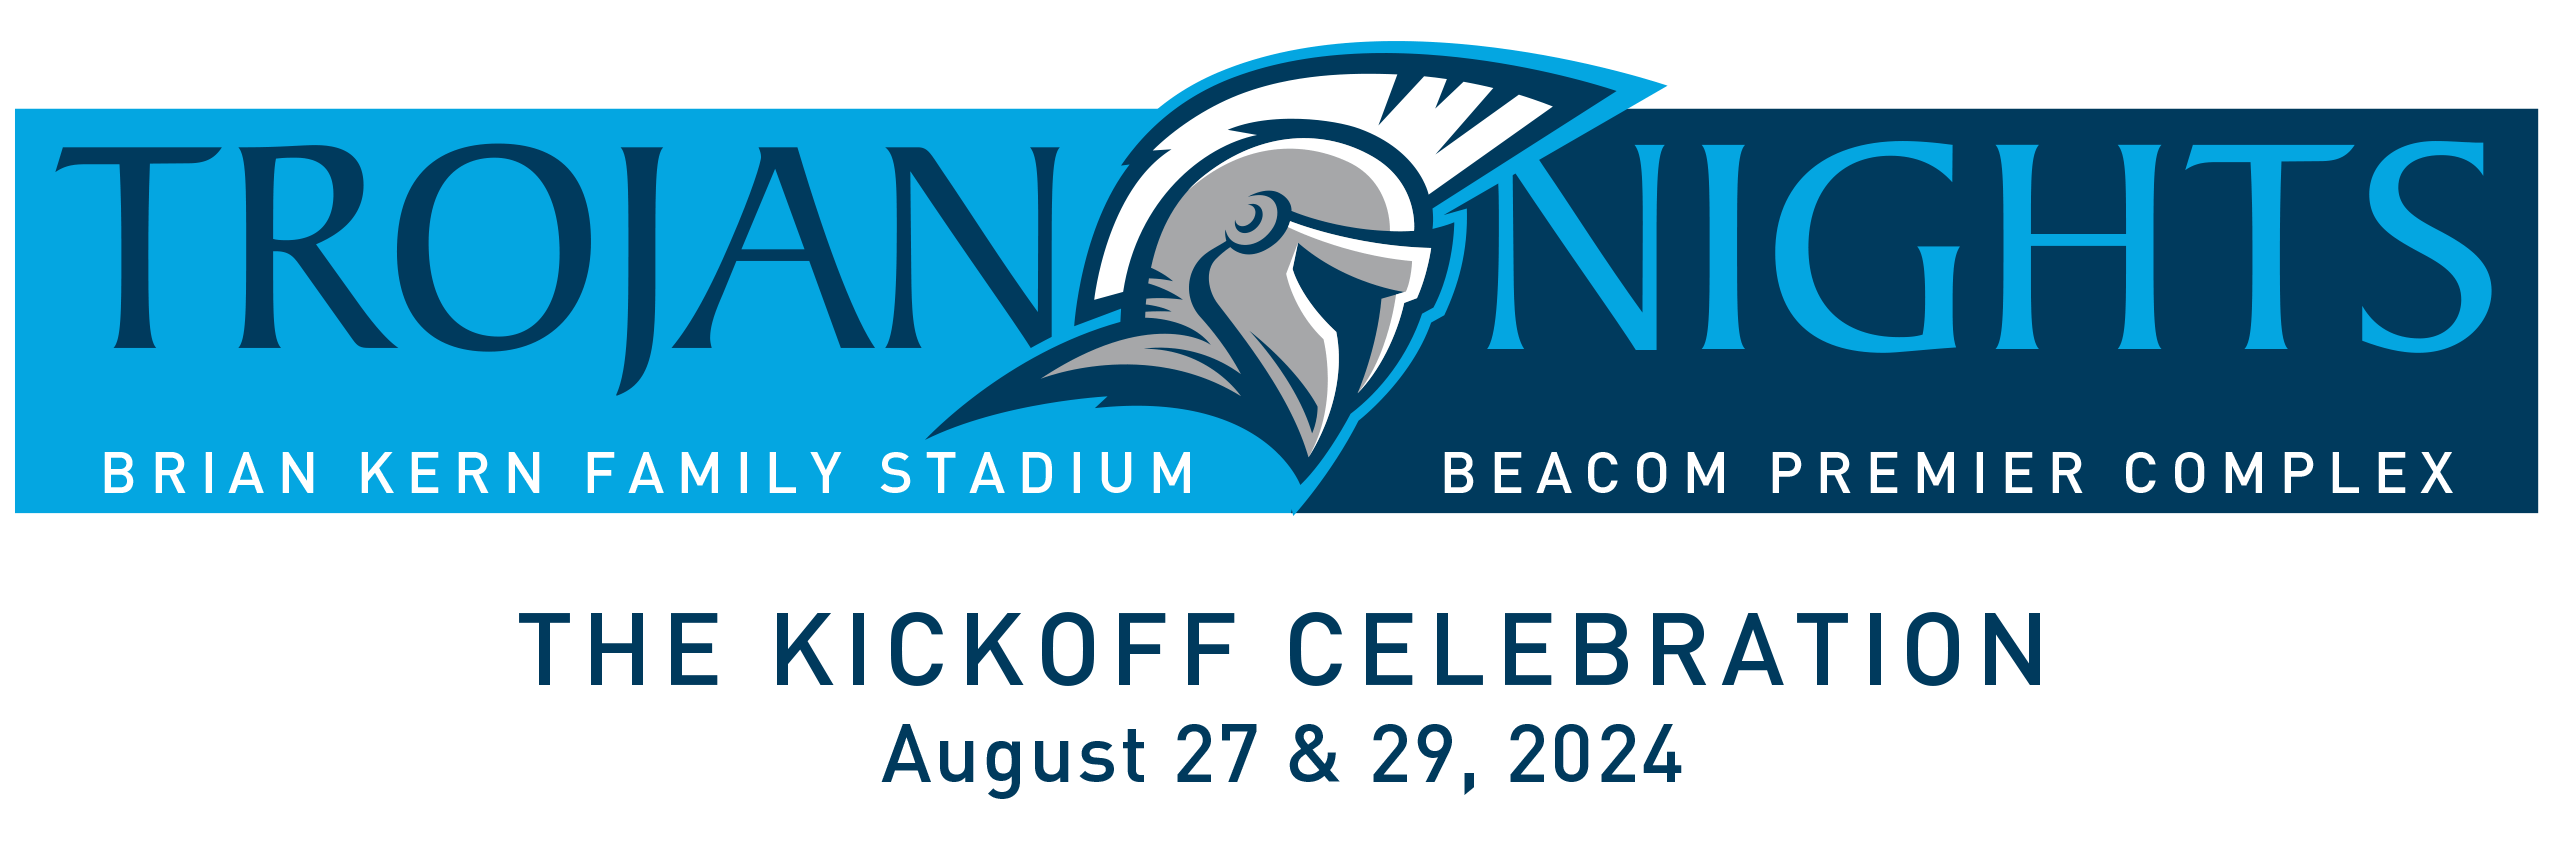 Trojan Nights Event the kick-off celebration August 27 and 29